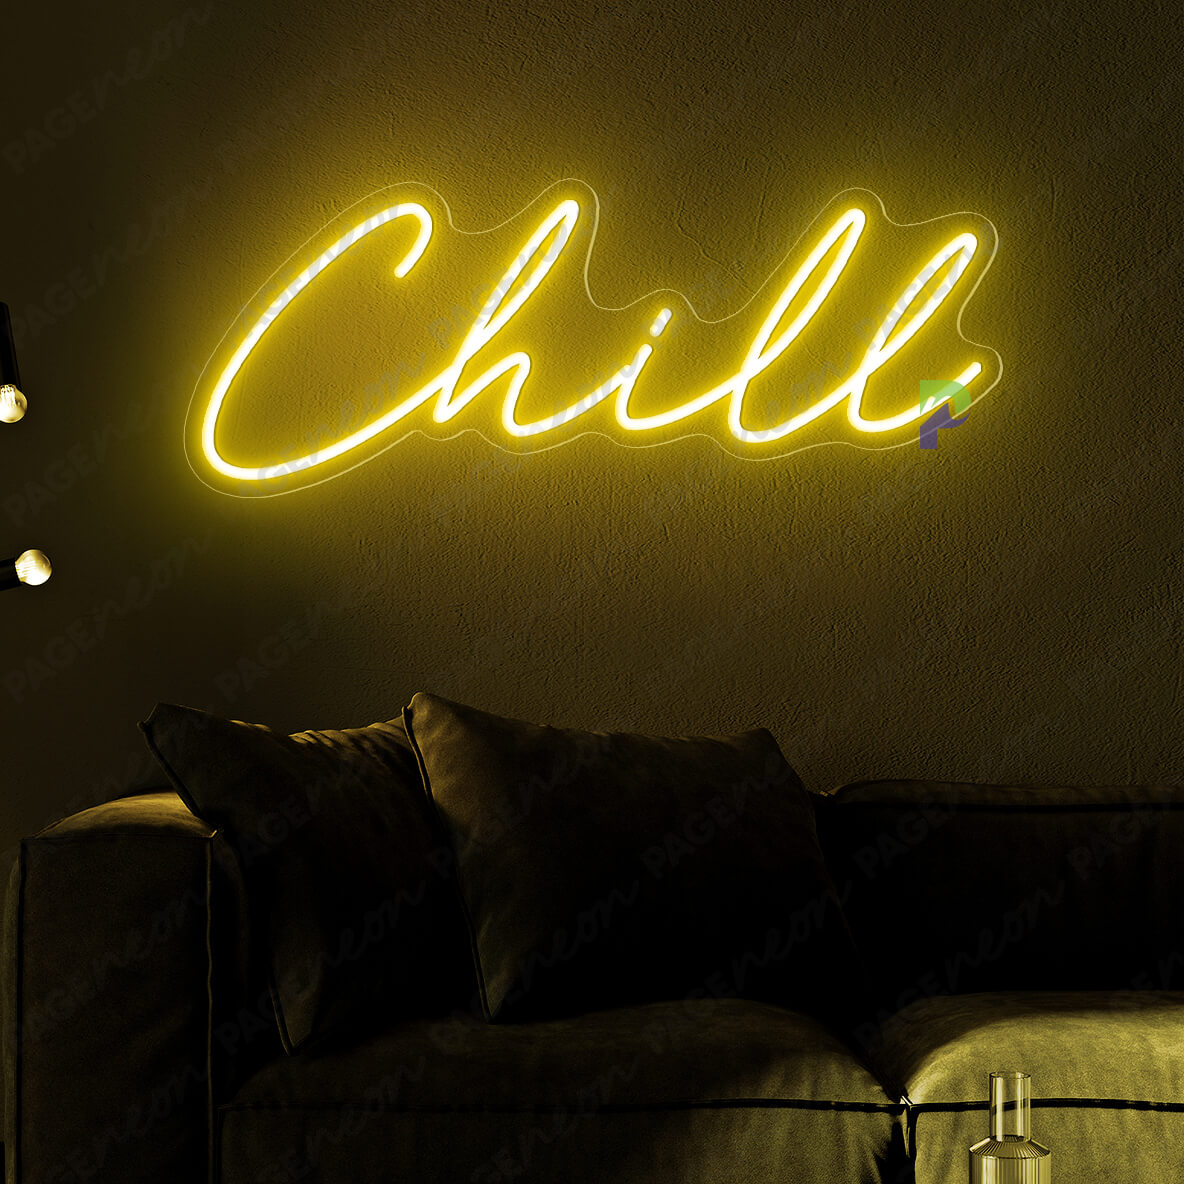 Chill Neon Sign Inspirational Led Light Yellow